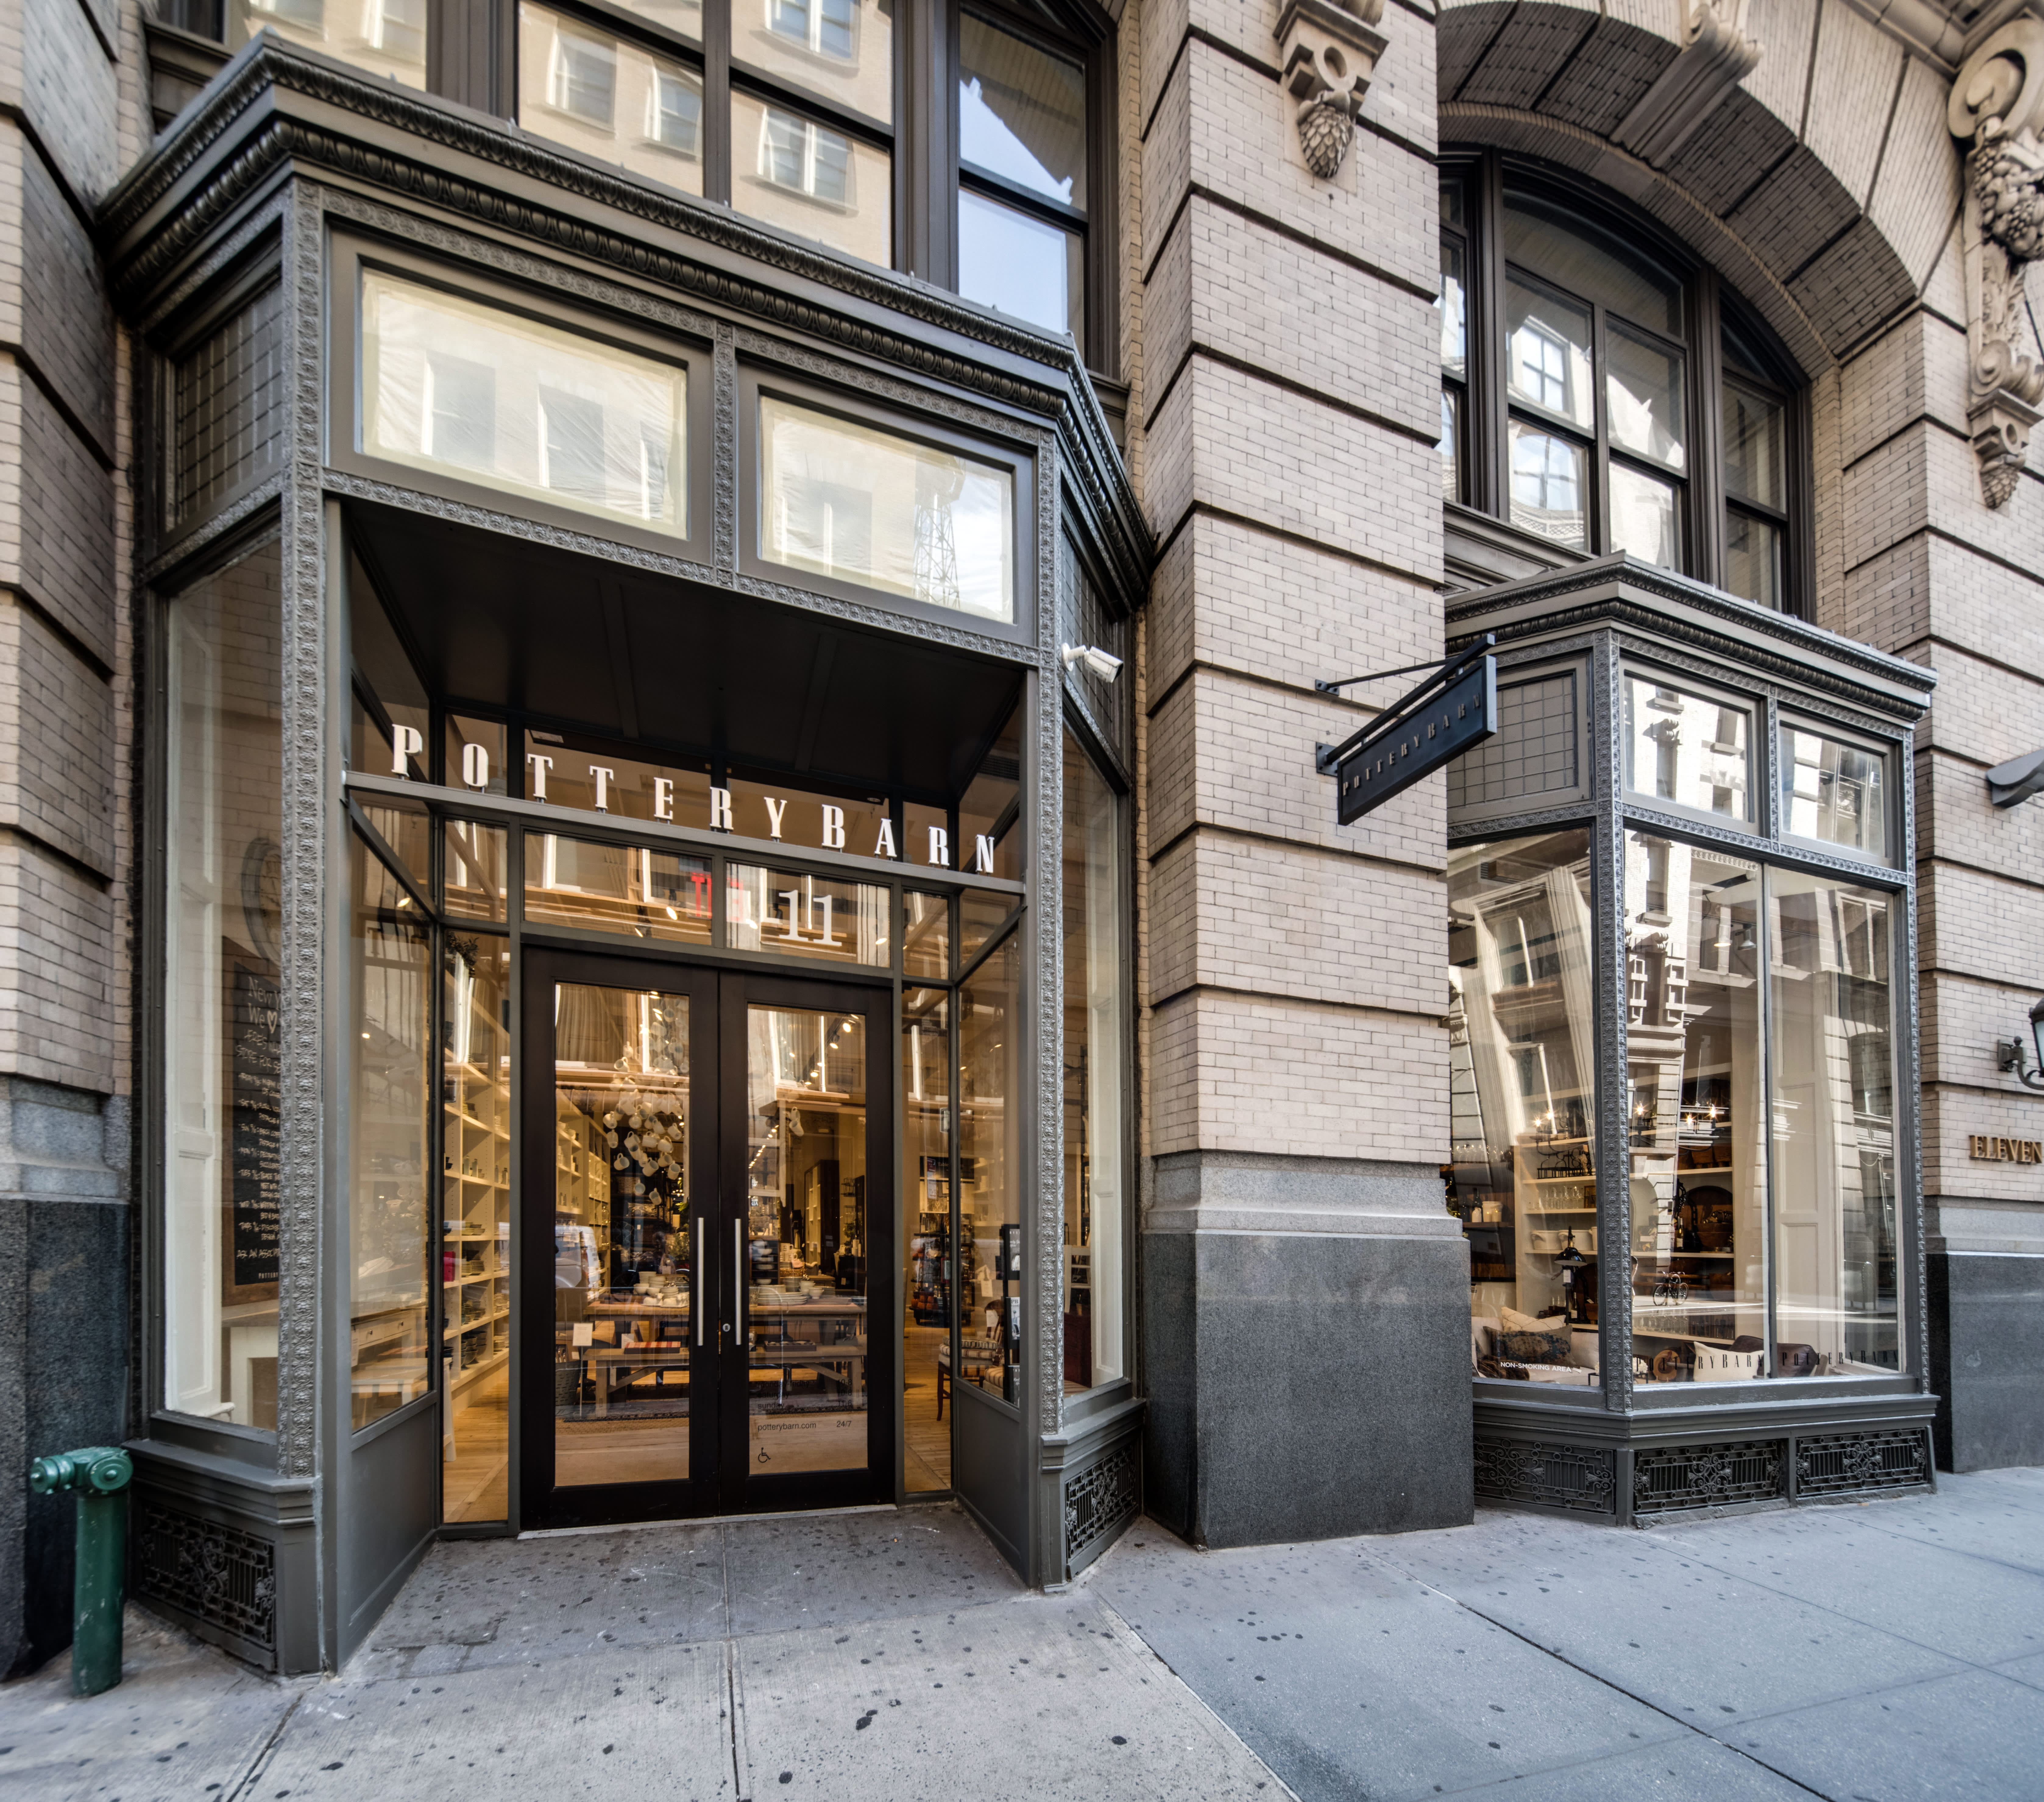 Pottery Barn (Now Closed) - Furniture and Home Store in Upper East Side